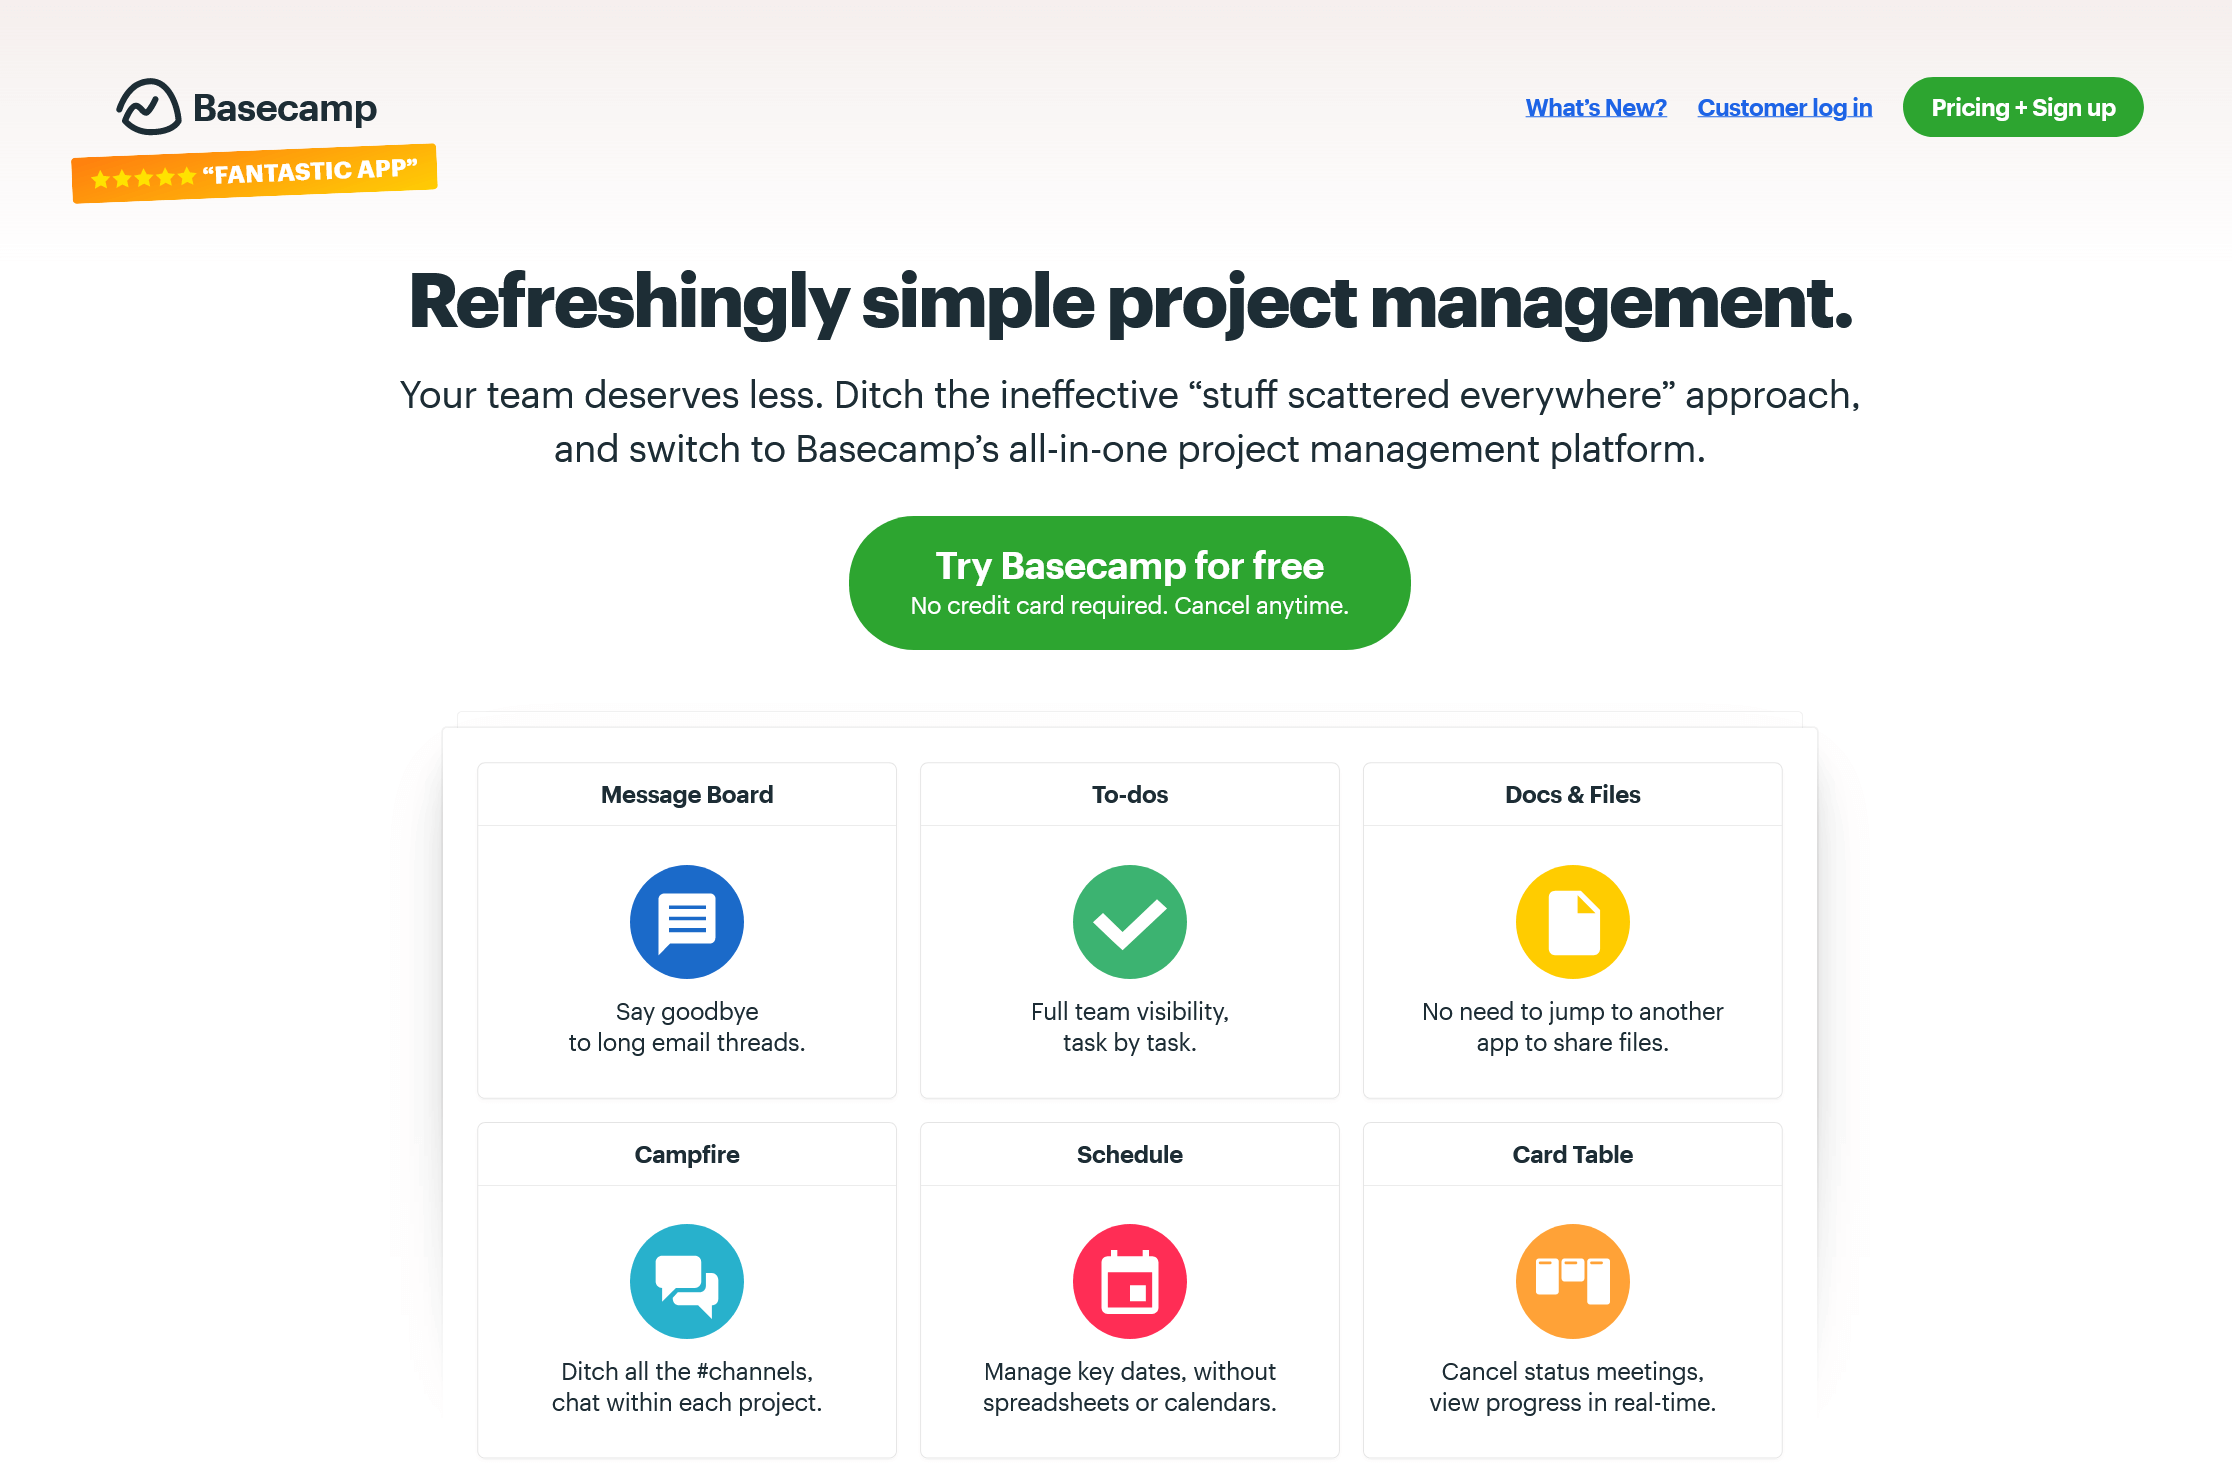 Basecamp is a B2B project management and team collaboration